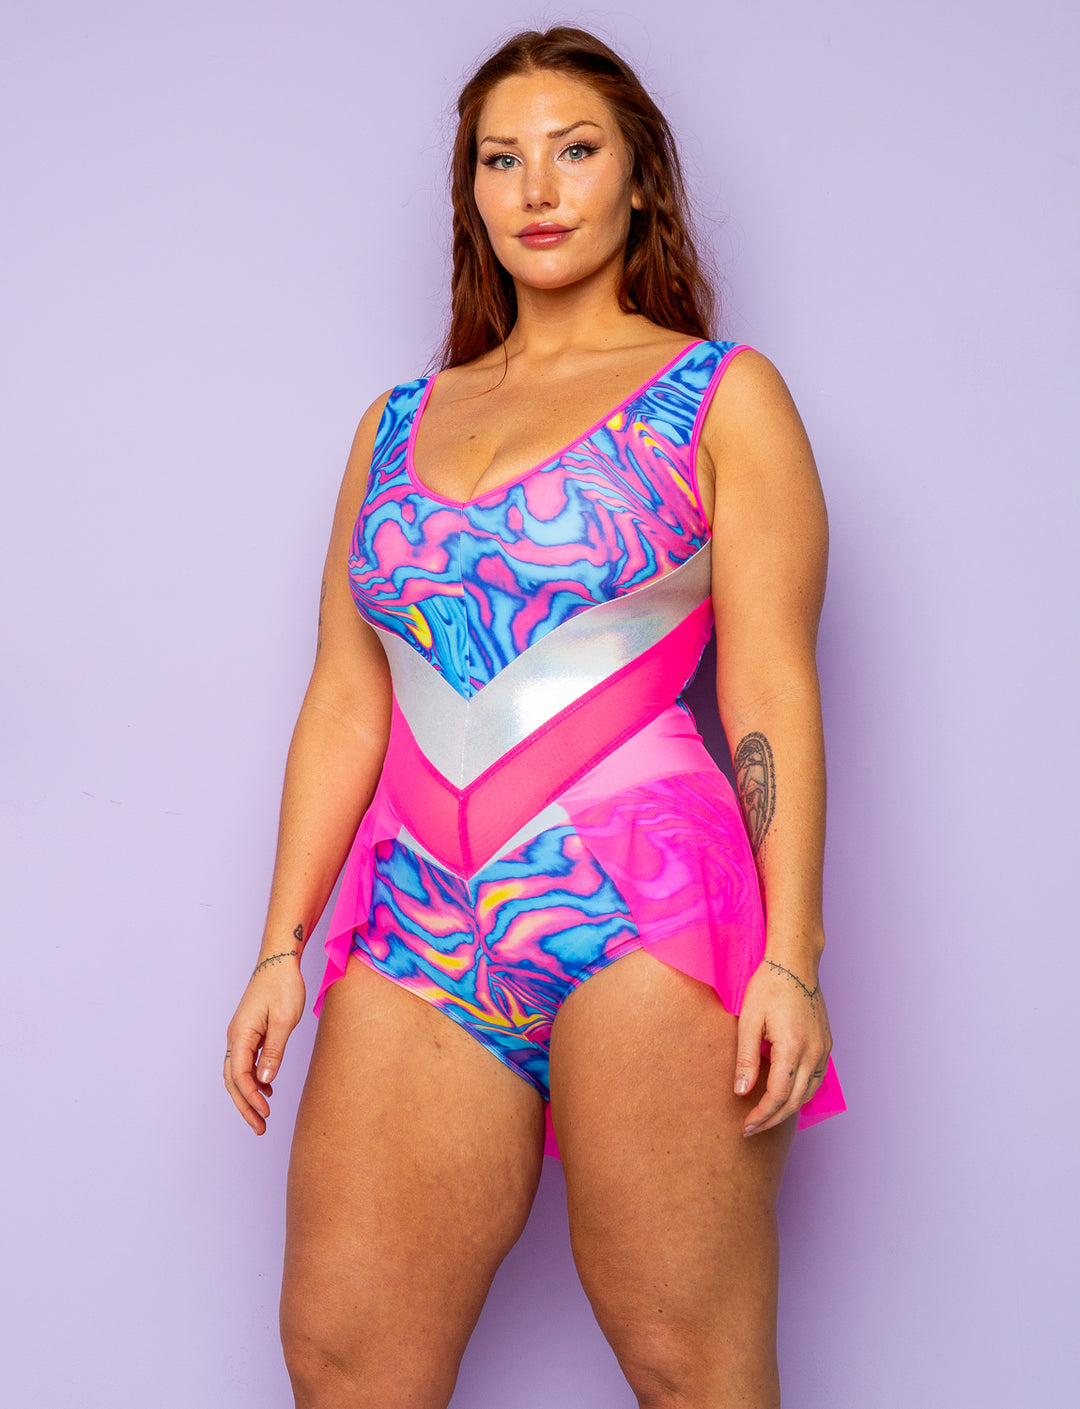 Woman wearing a pink and blue swirly print lycra bodysuit with pink mesh skirt.